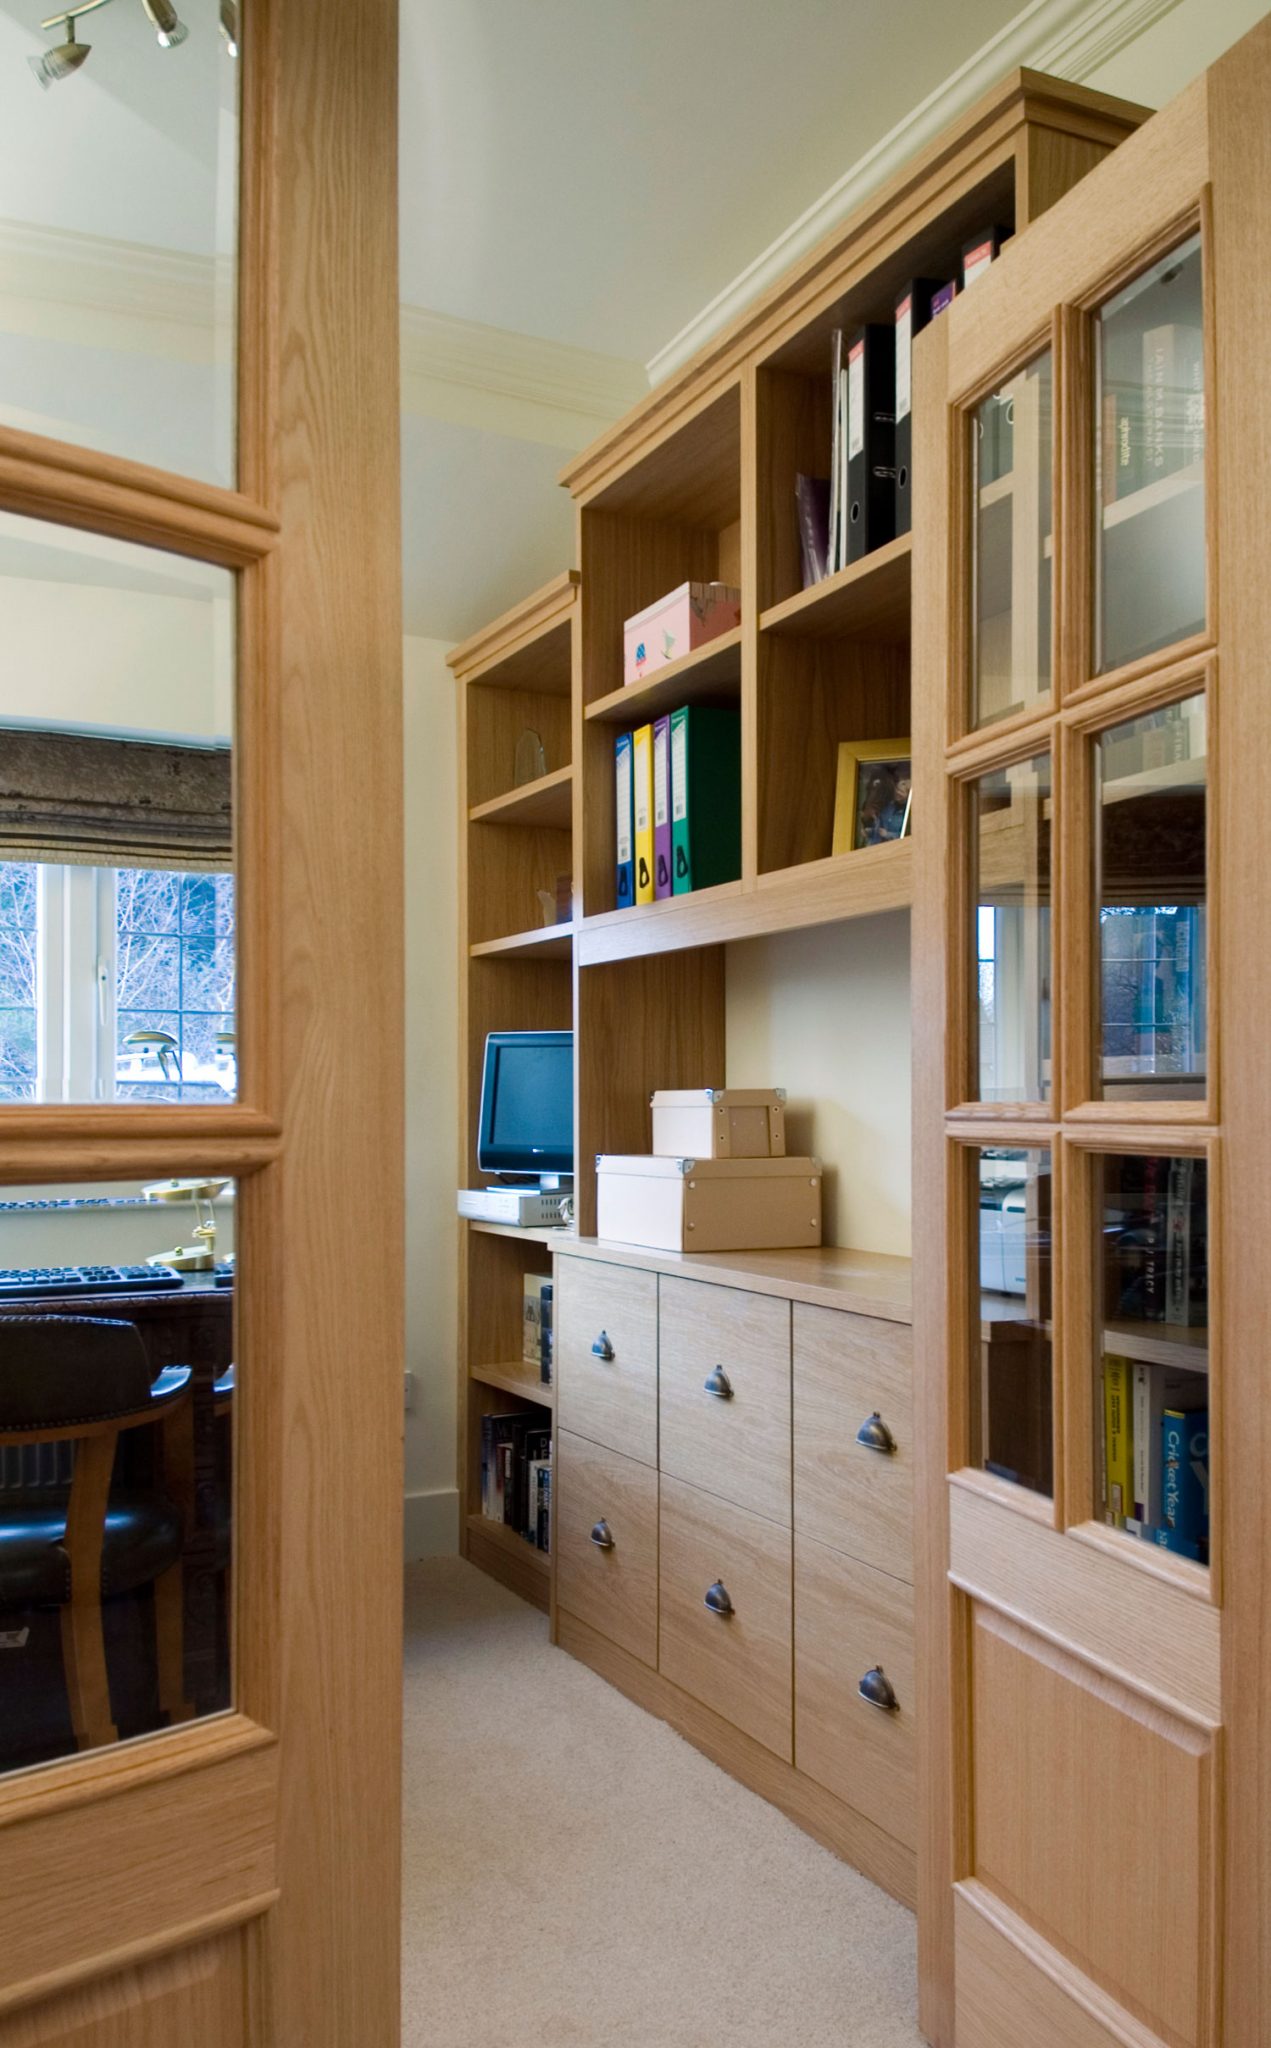 Making the most of your home office space